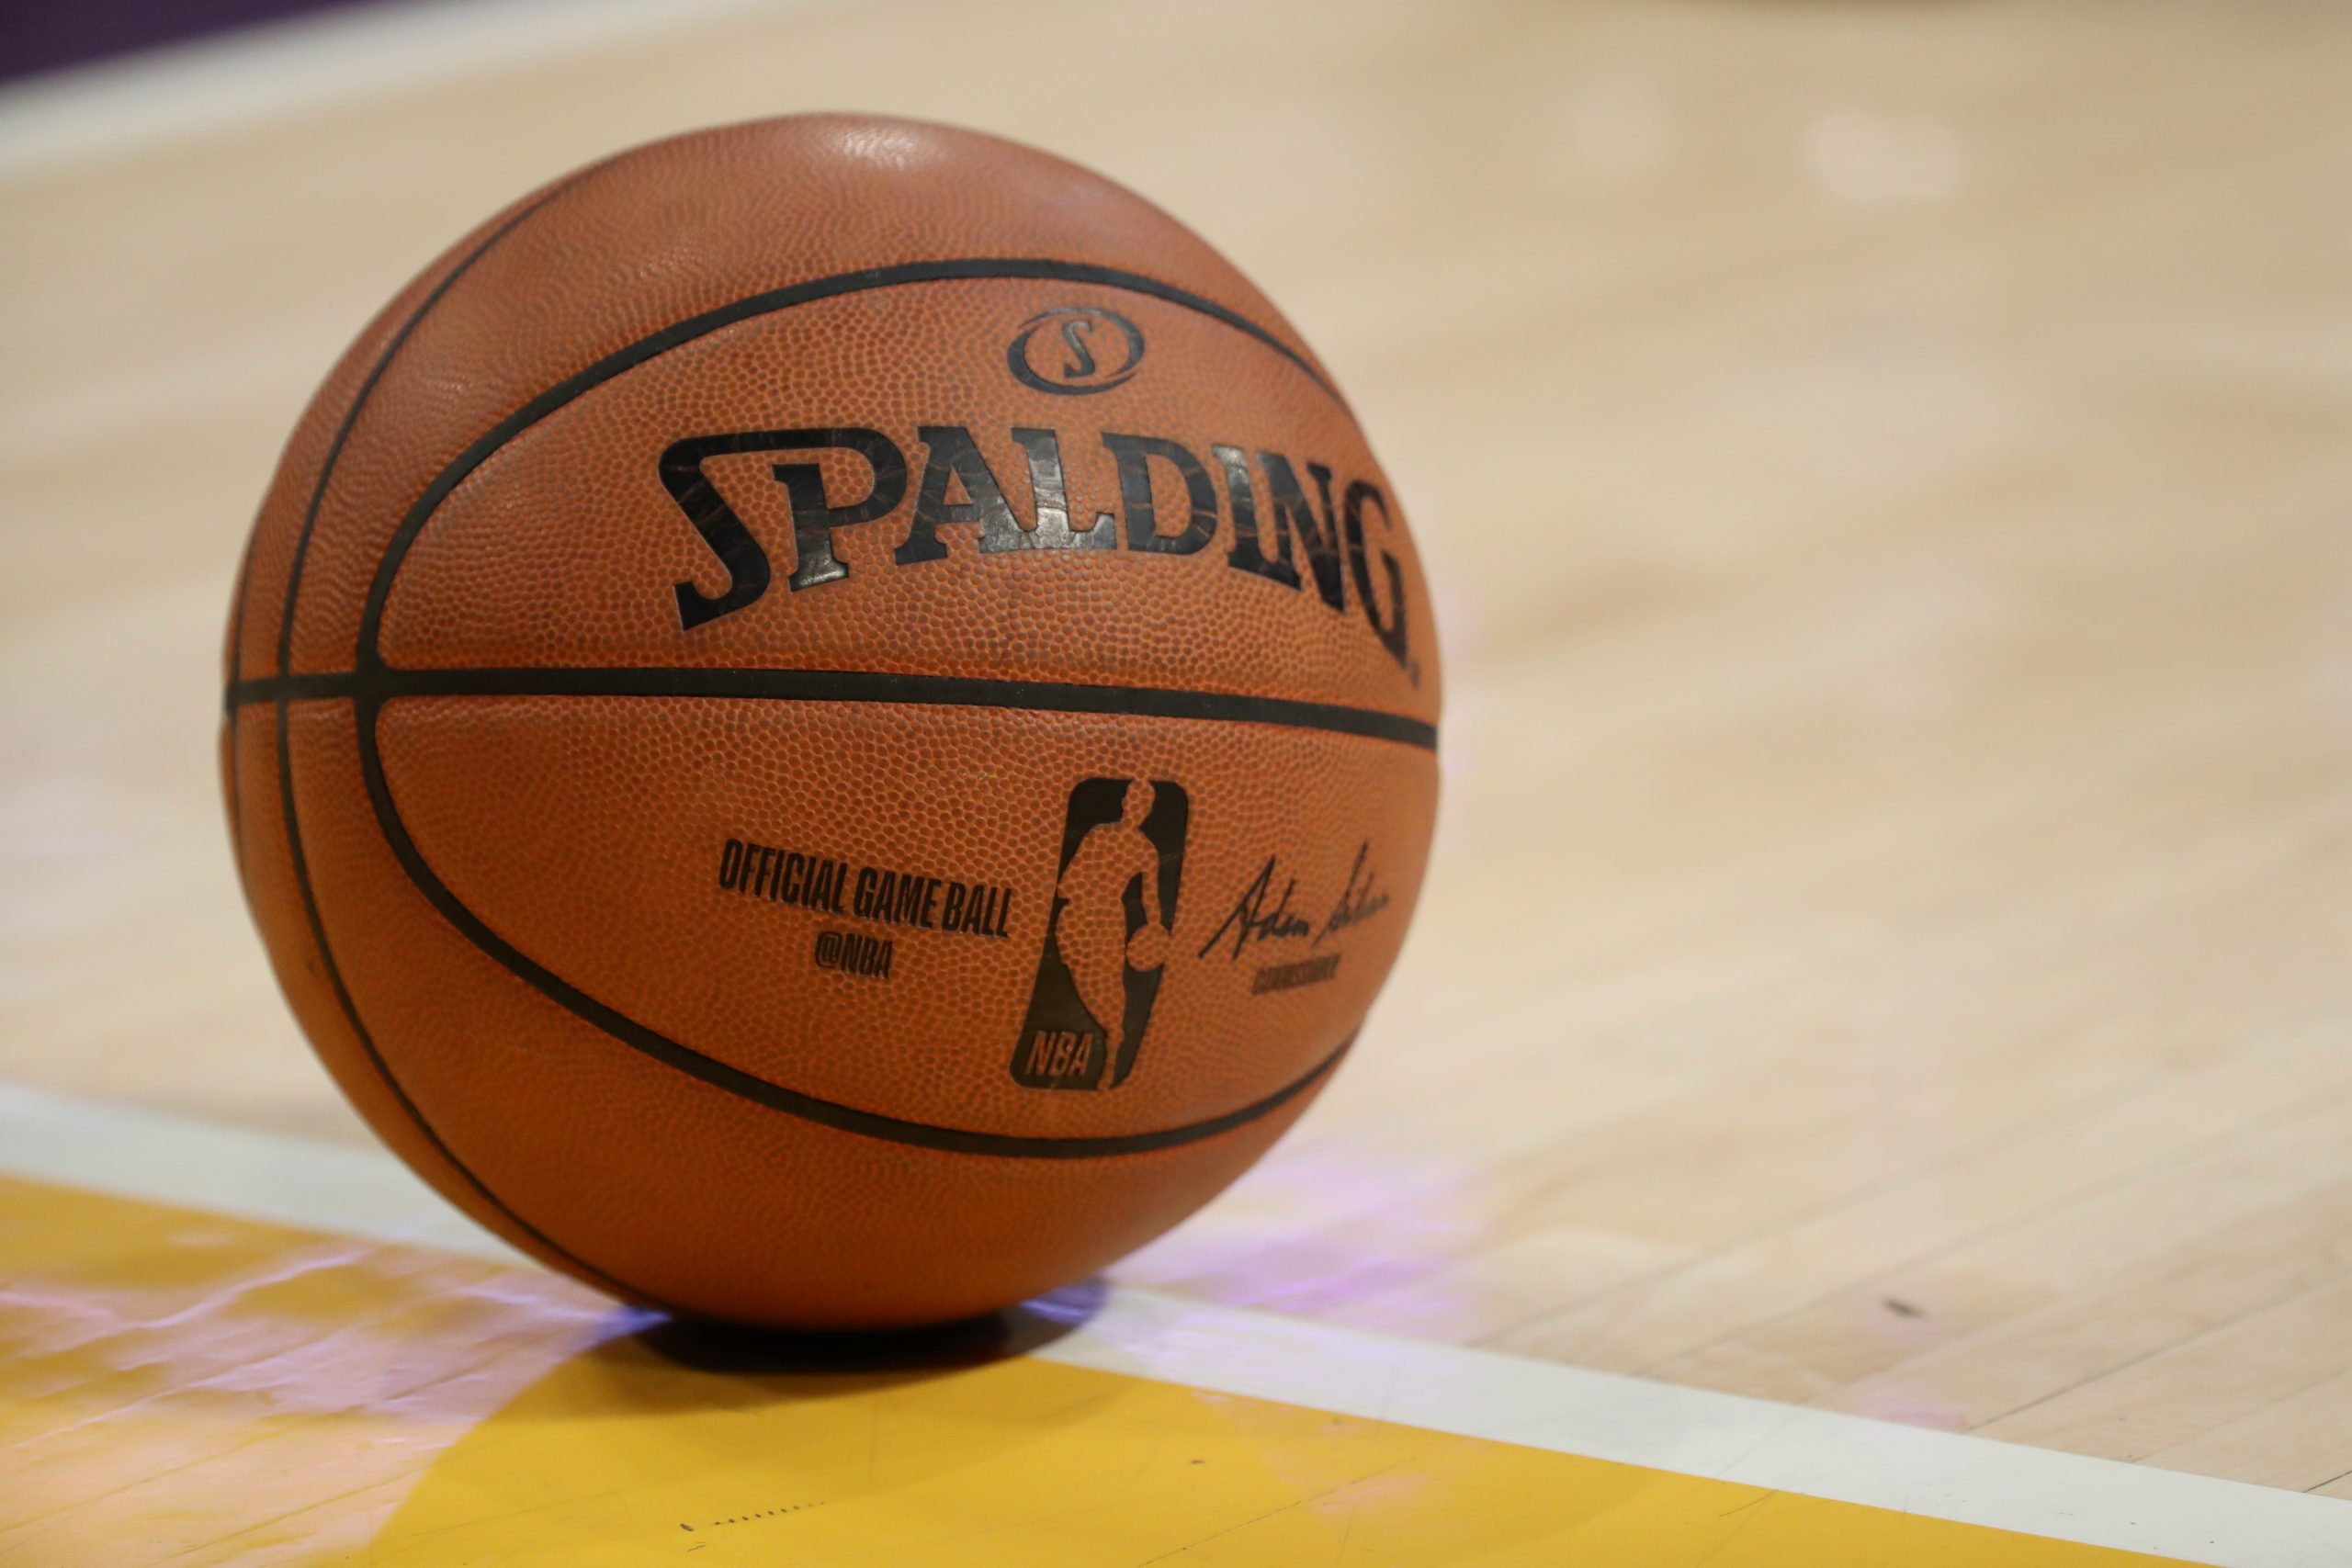 LOS ANGELES, CALIFORNIA - FEBRUARY 25: A detailed view of the Spalding basketball on the court duri...